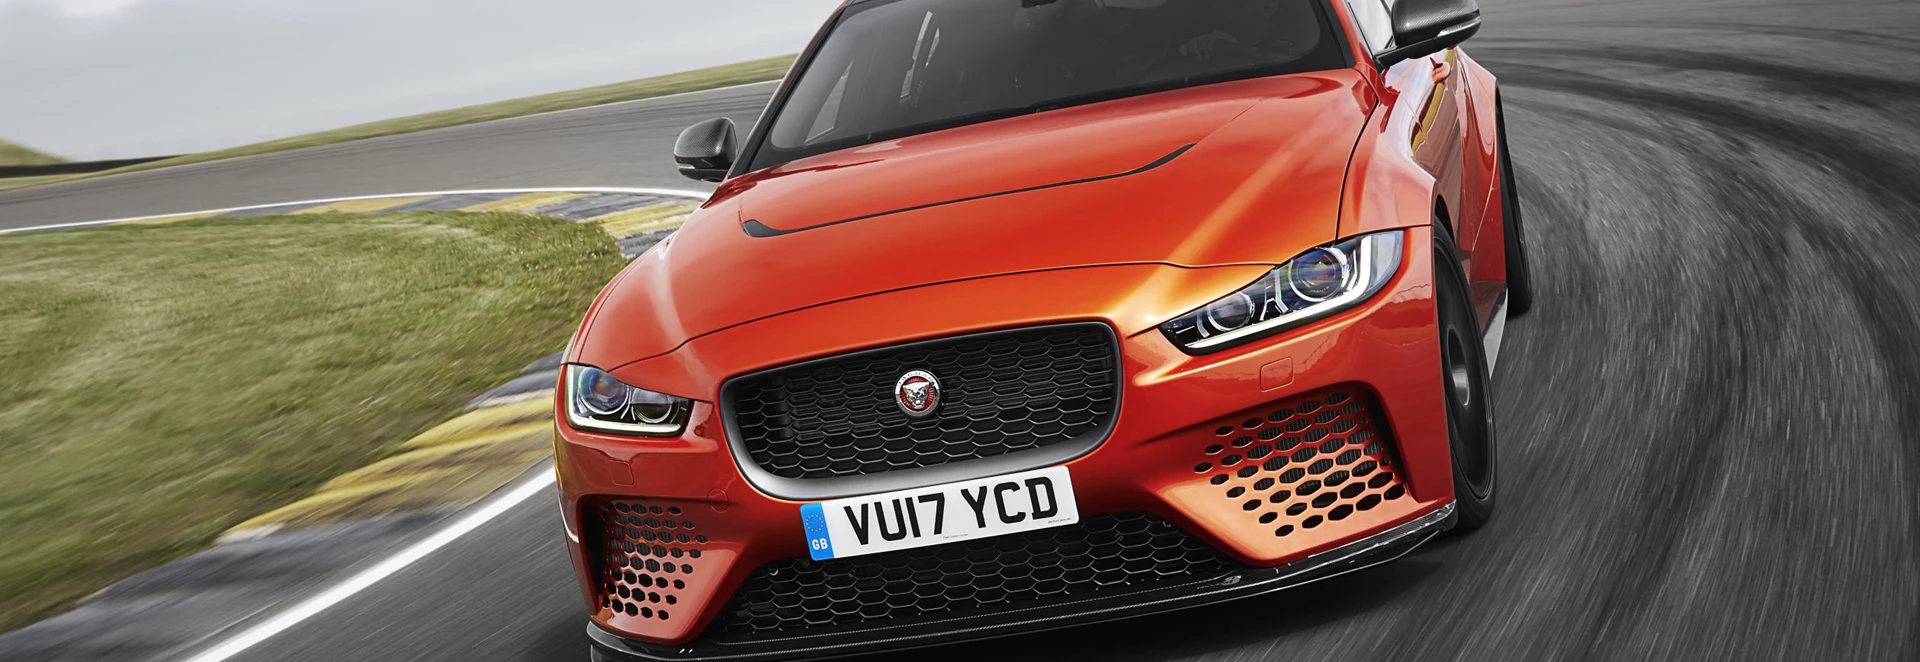 Jaguar XE SV Project 8 unmasked with pricing confirmed 